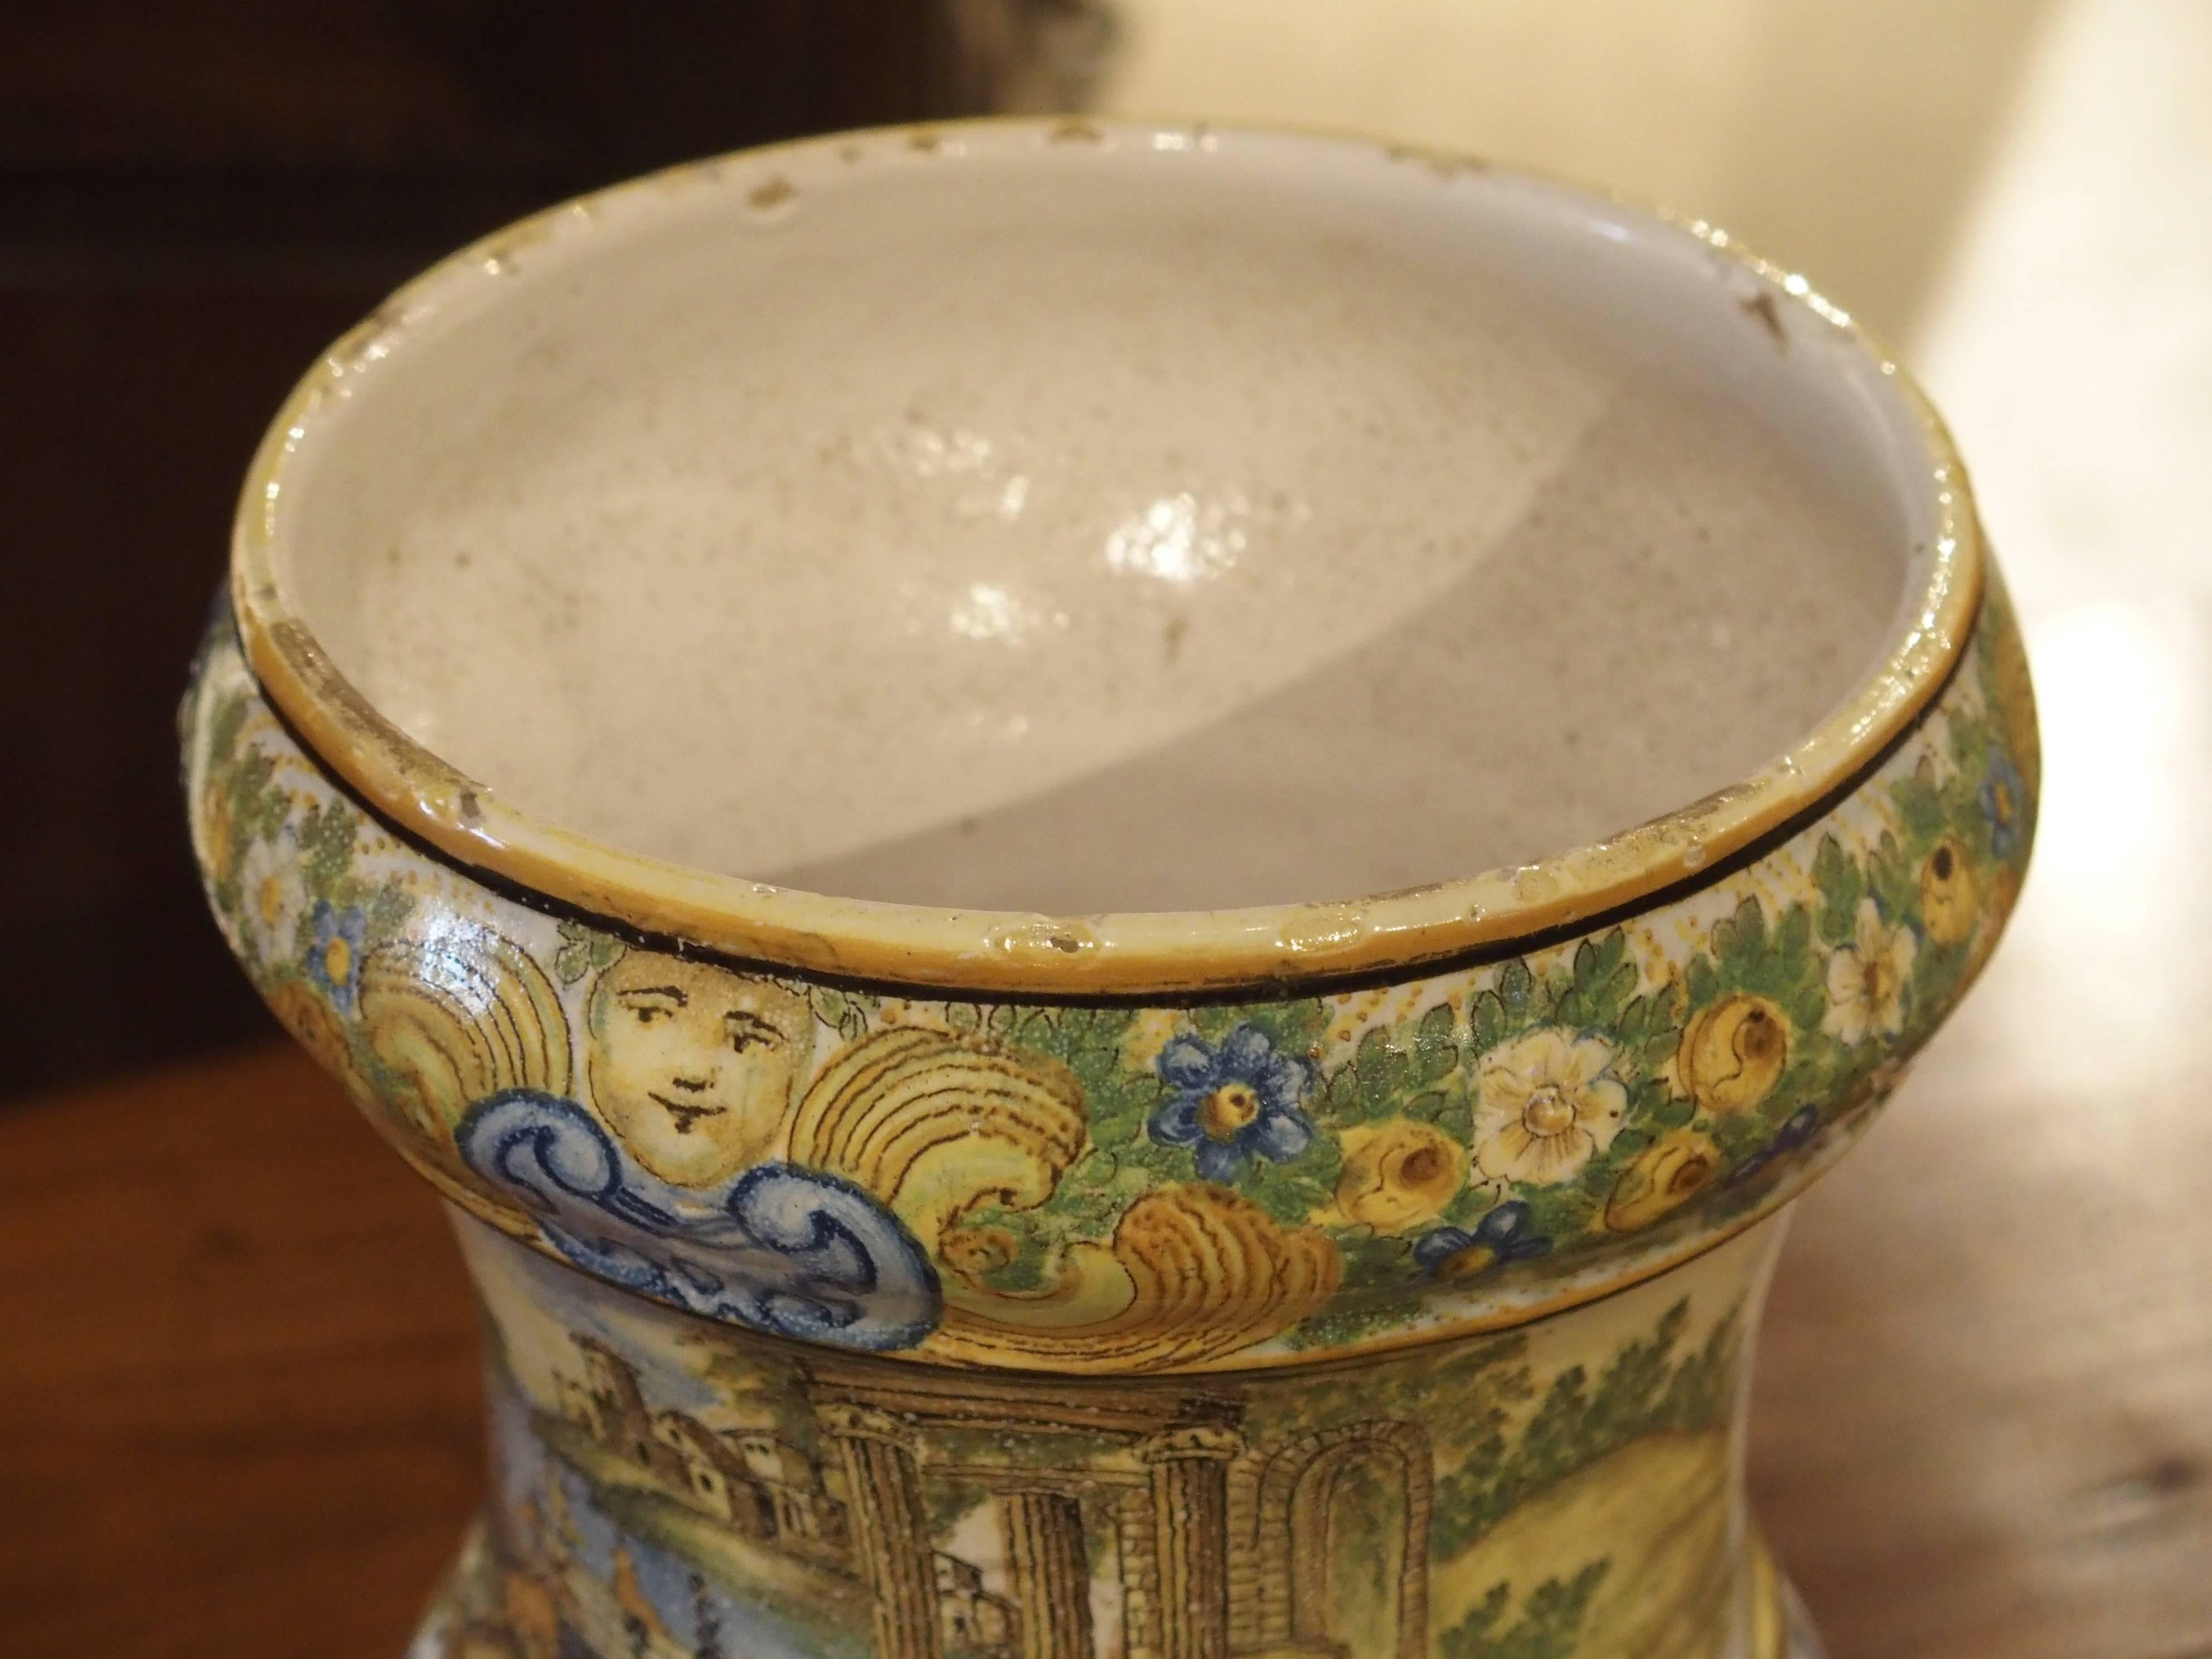 This charming antique hand painted urn from Italy depicts a continuous, all around scene at its centre. The main colors are a mix of soft yellows, blues, and greens. The main subject is a large body of water with a variety of structures and figures